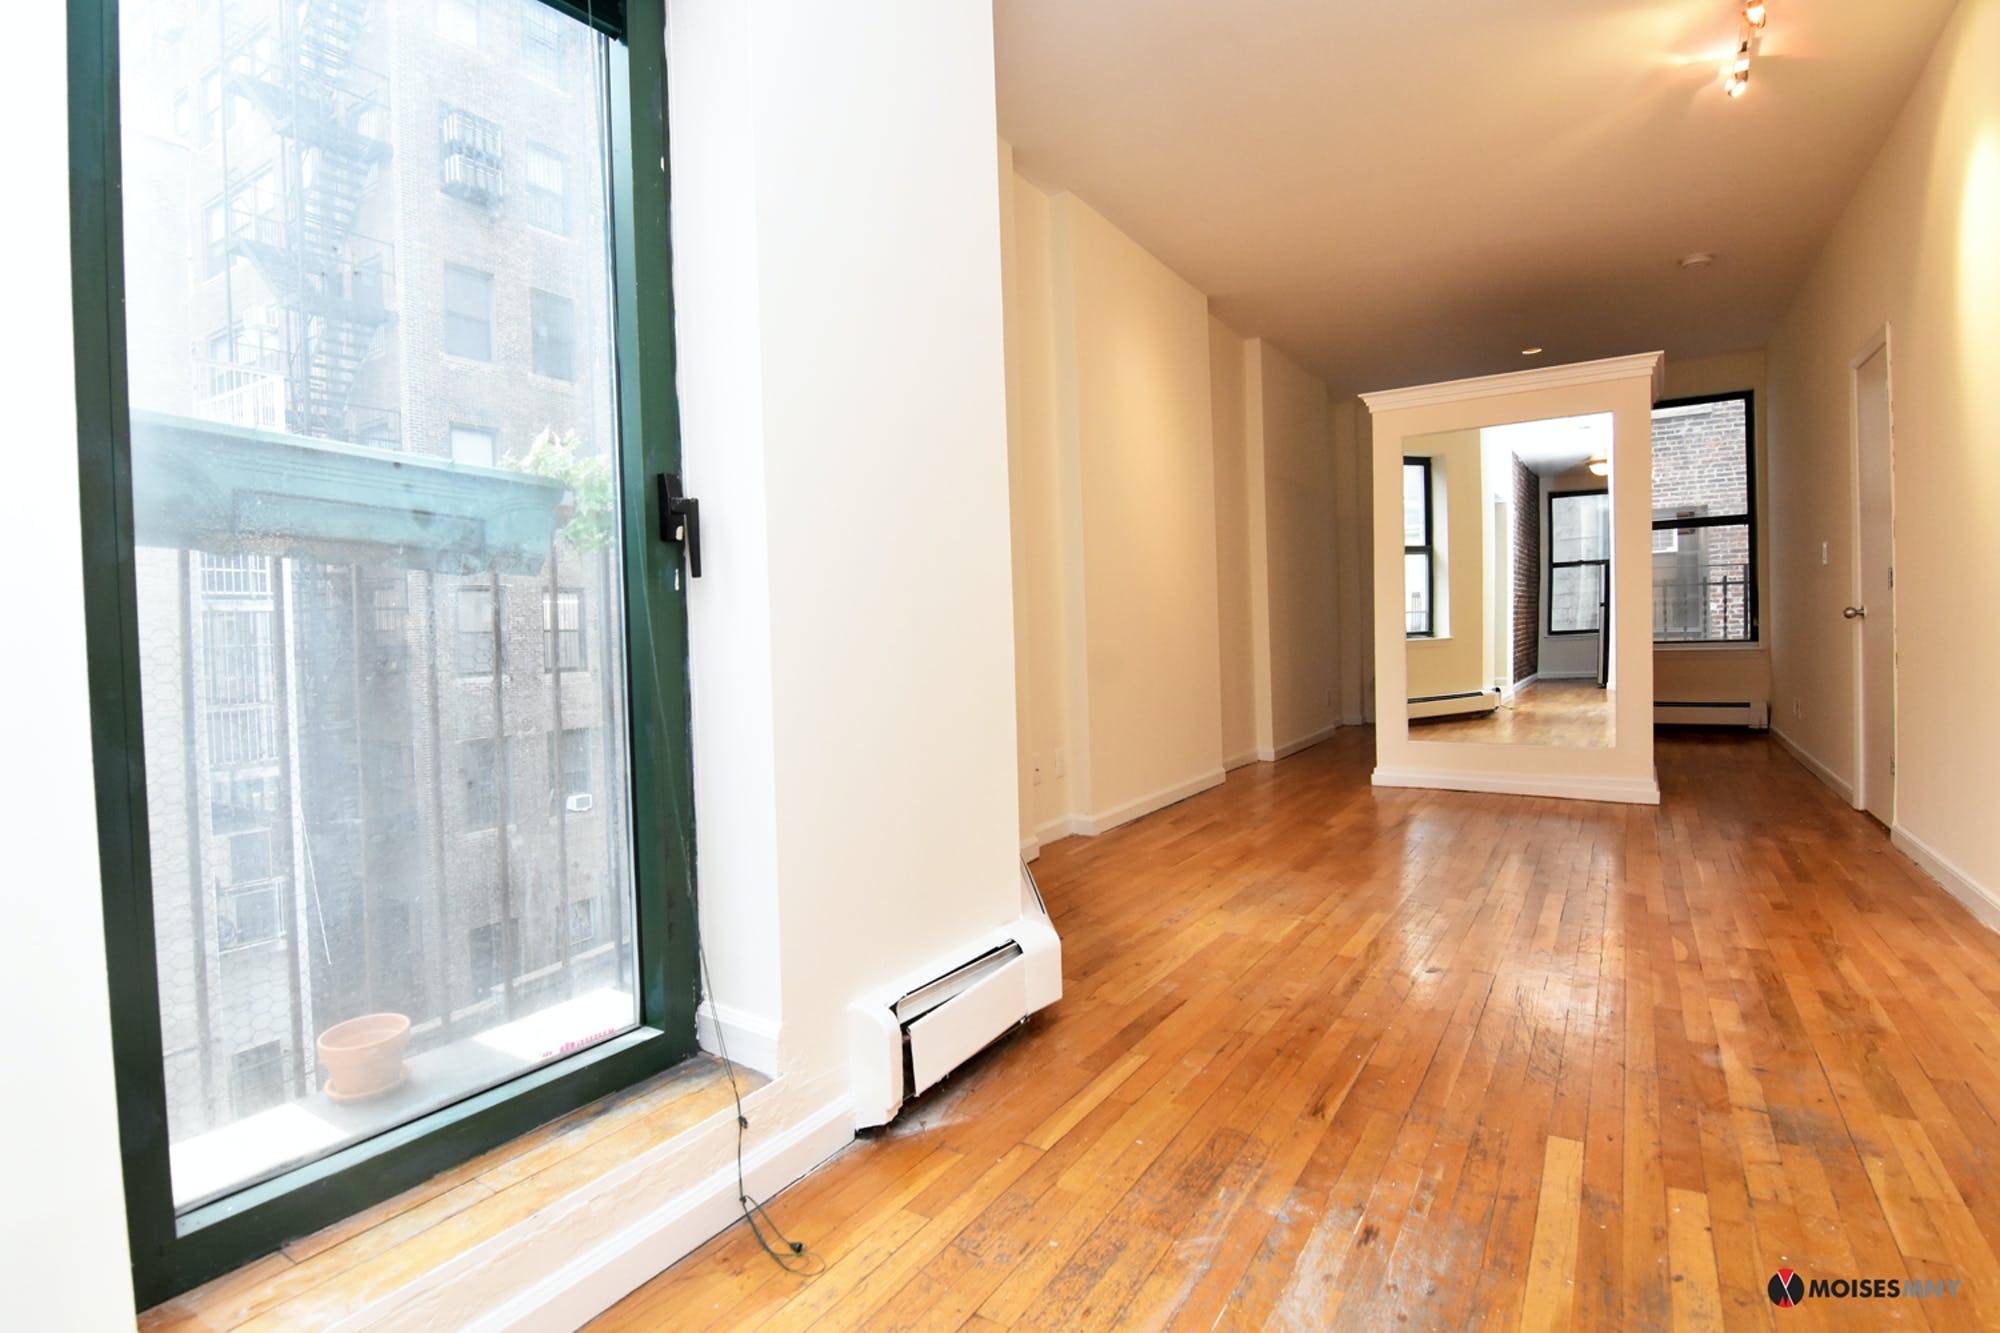 Actual Photos of the Apartment Plus, Photos from other Currently Available Apartments in the Same Building Videos and Virtual Tours Available Recently Renovated Convertible one bedroom Alcove Studios in Chelsea ...